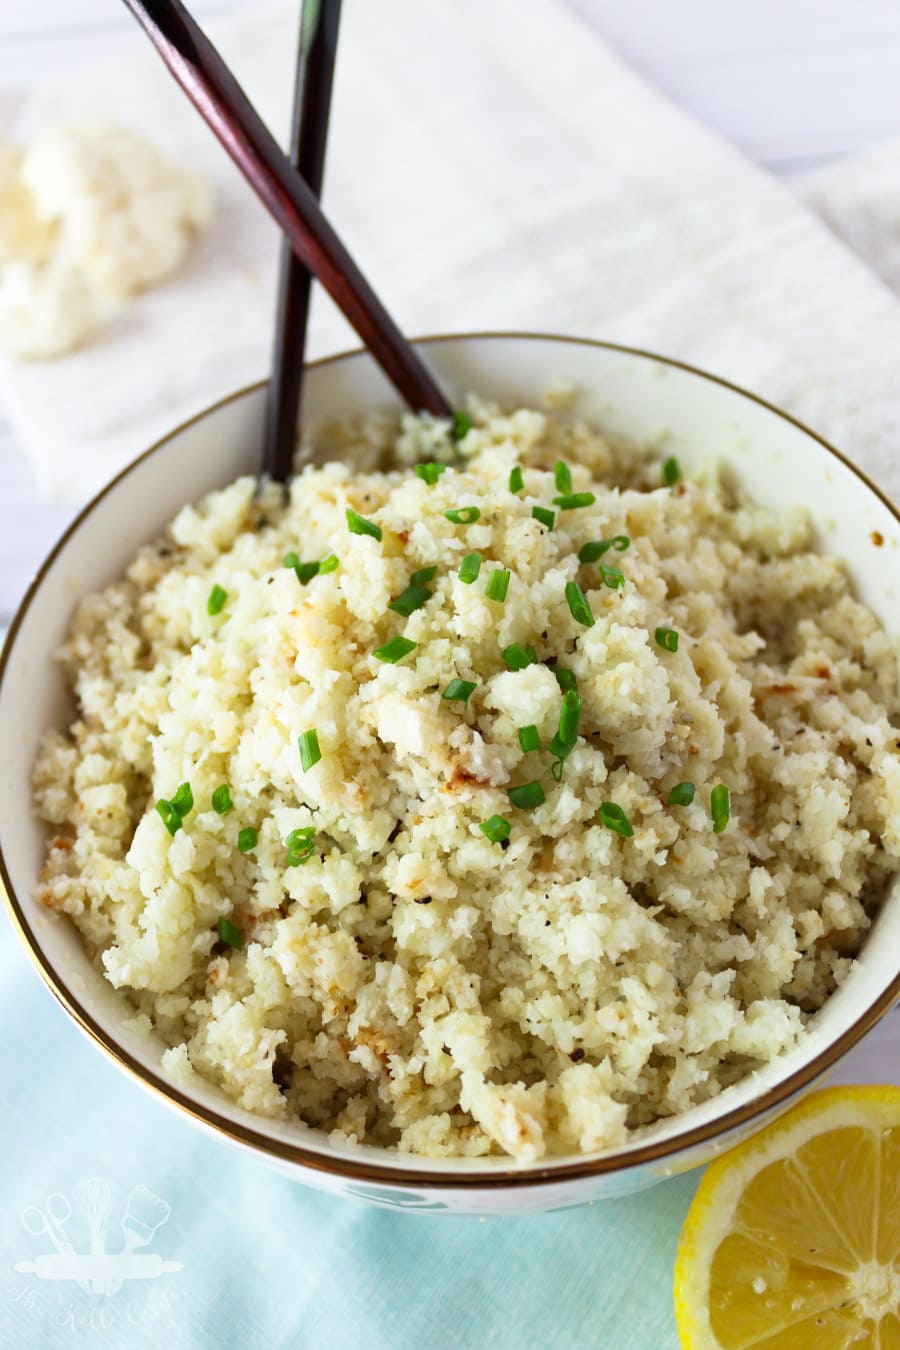 How To Make Cauliflower Rice | Low-Carb, Paleo and Keto Friendly